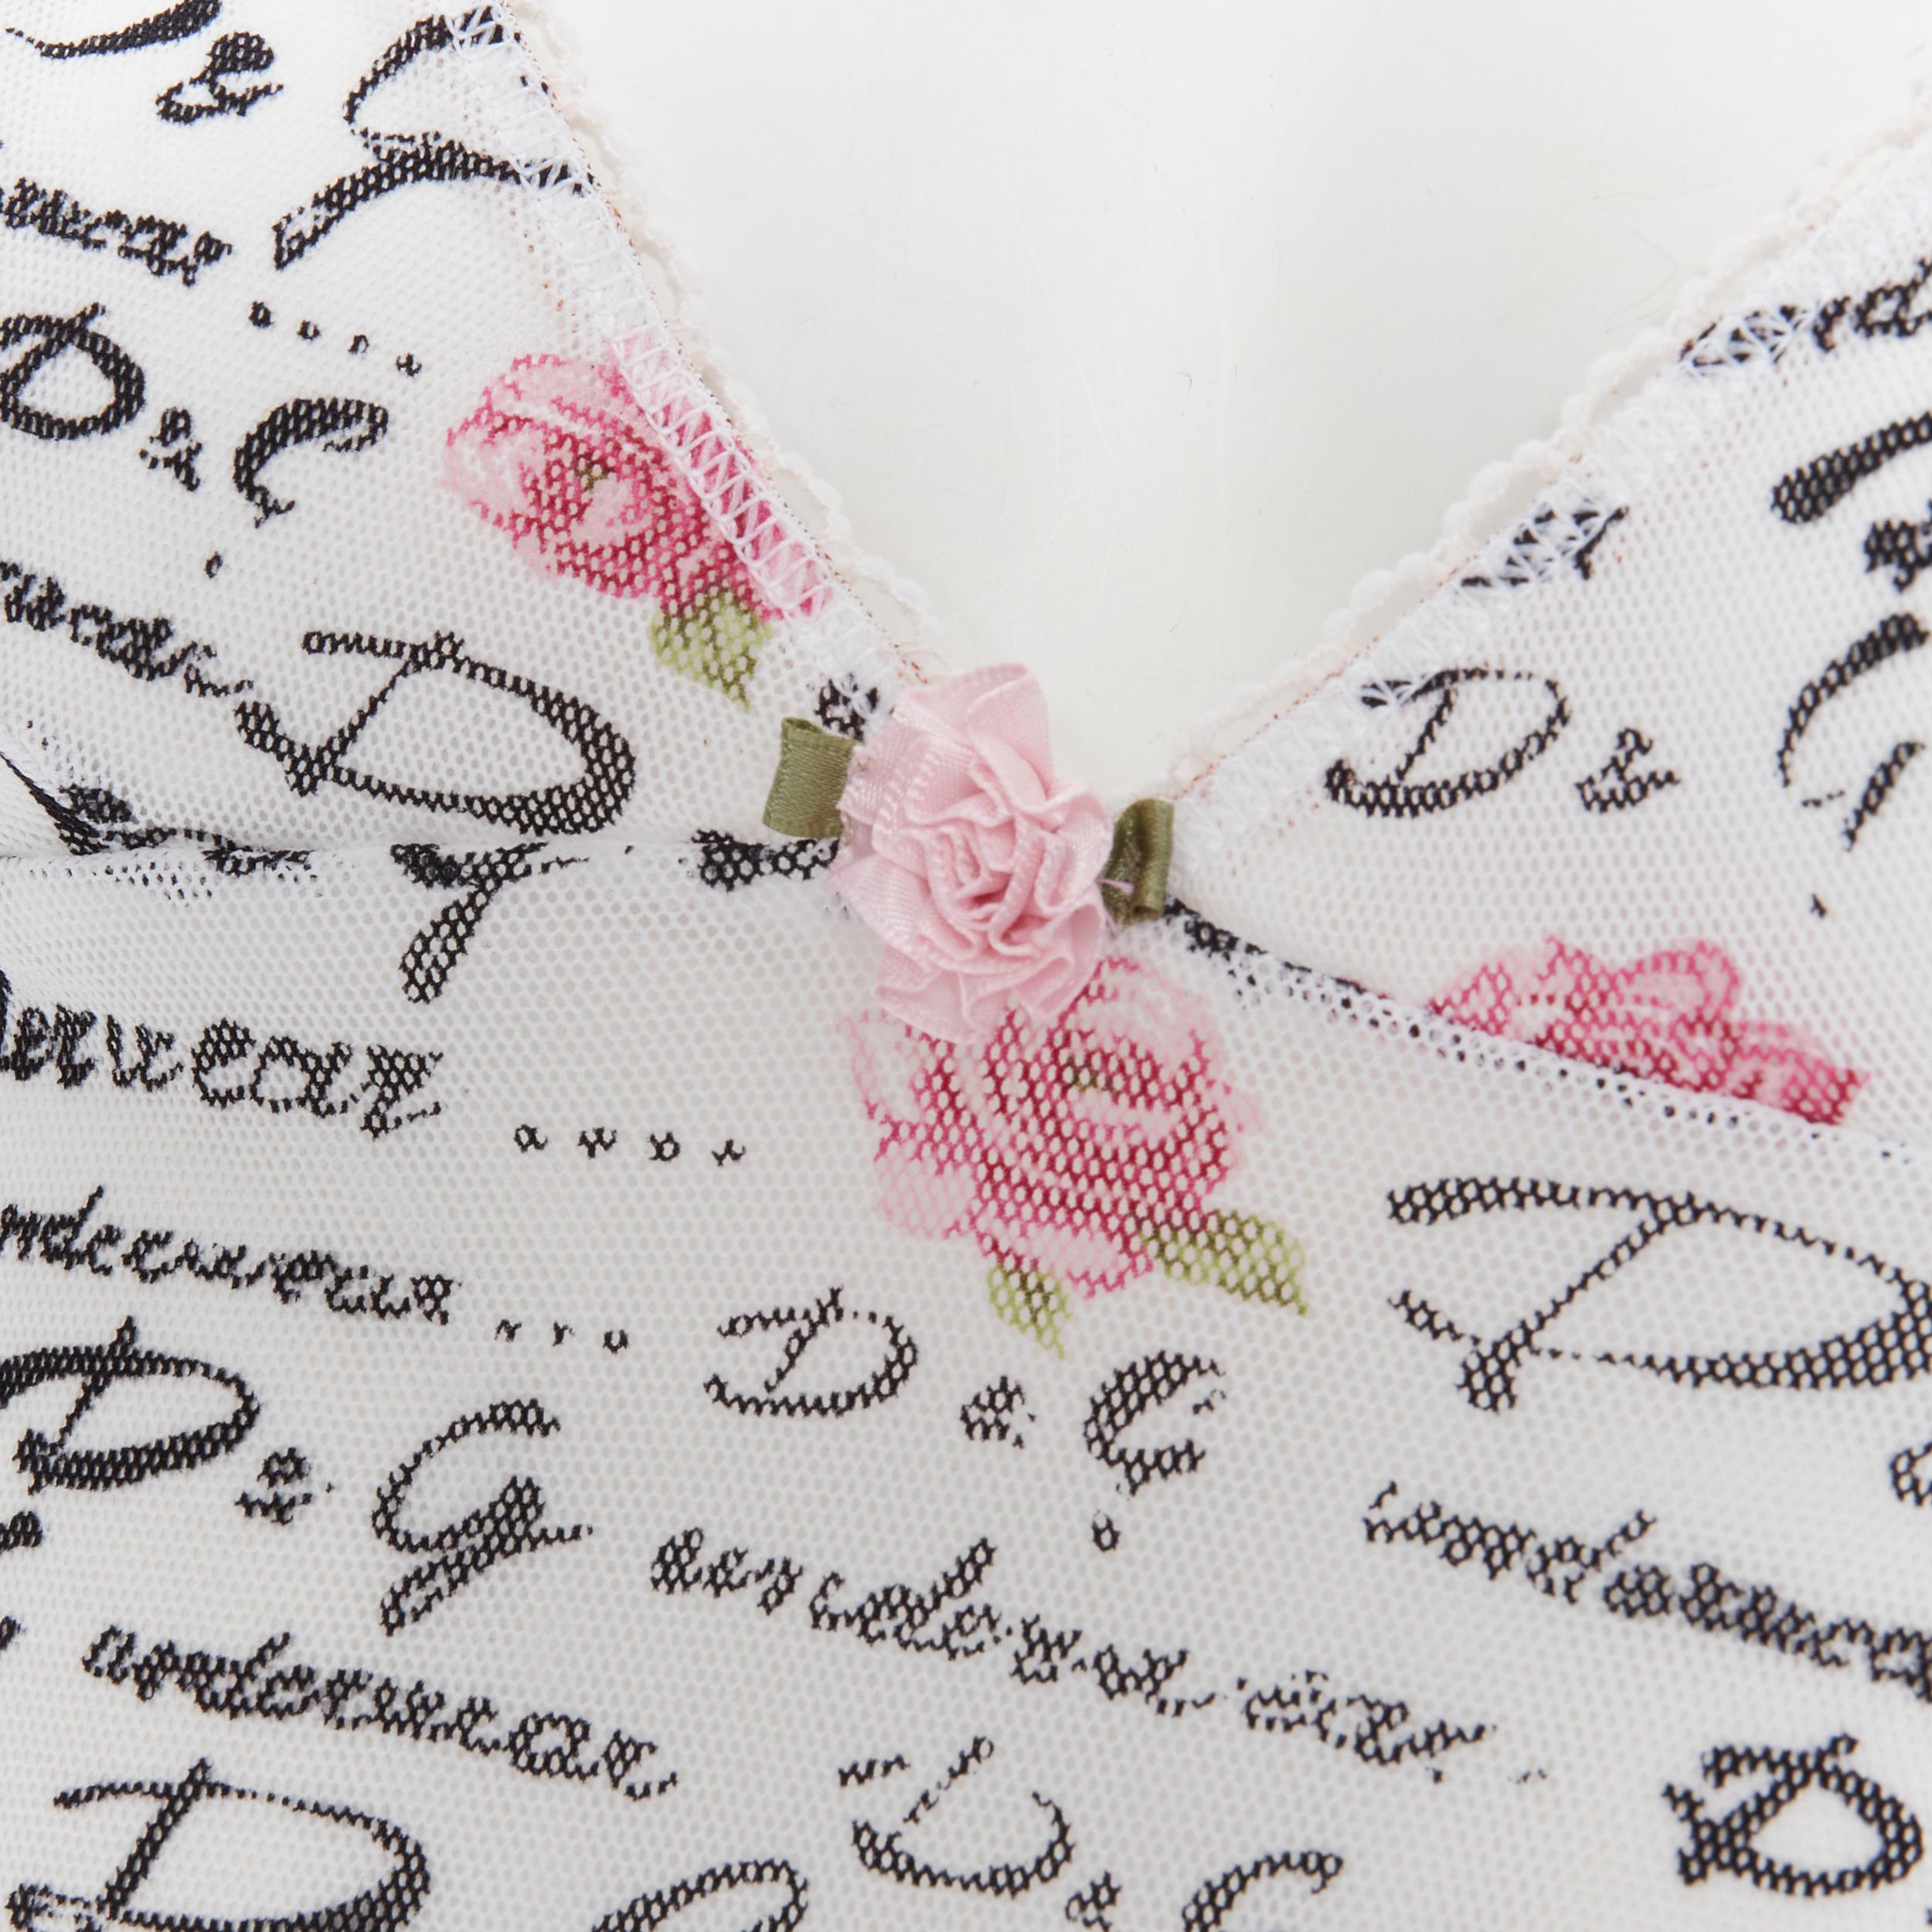 new D&G DOLCE GABBANA Underwear white logo rose mesh lace trim cami tank top M 
Reference: TGAS/B01450 
Brand: Dolce Gabbana 
Material: Mesh 
Color: White 
Pattern: Floral 
Extra Detail: Rose bud detail at neckline. Lace trimming. Adjustable strap.